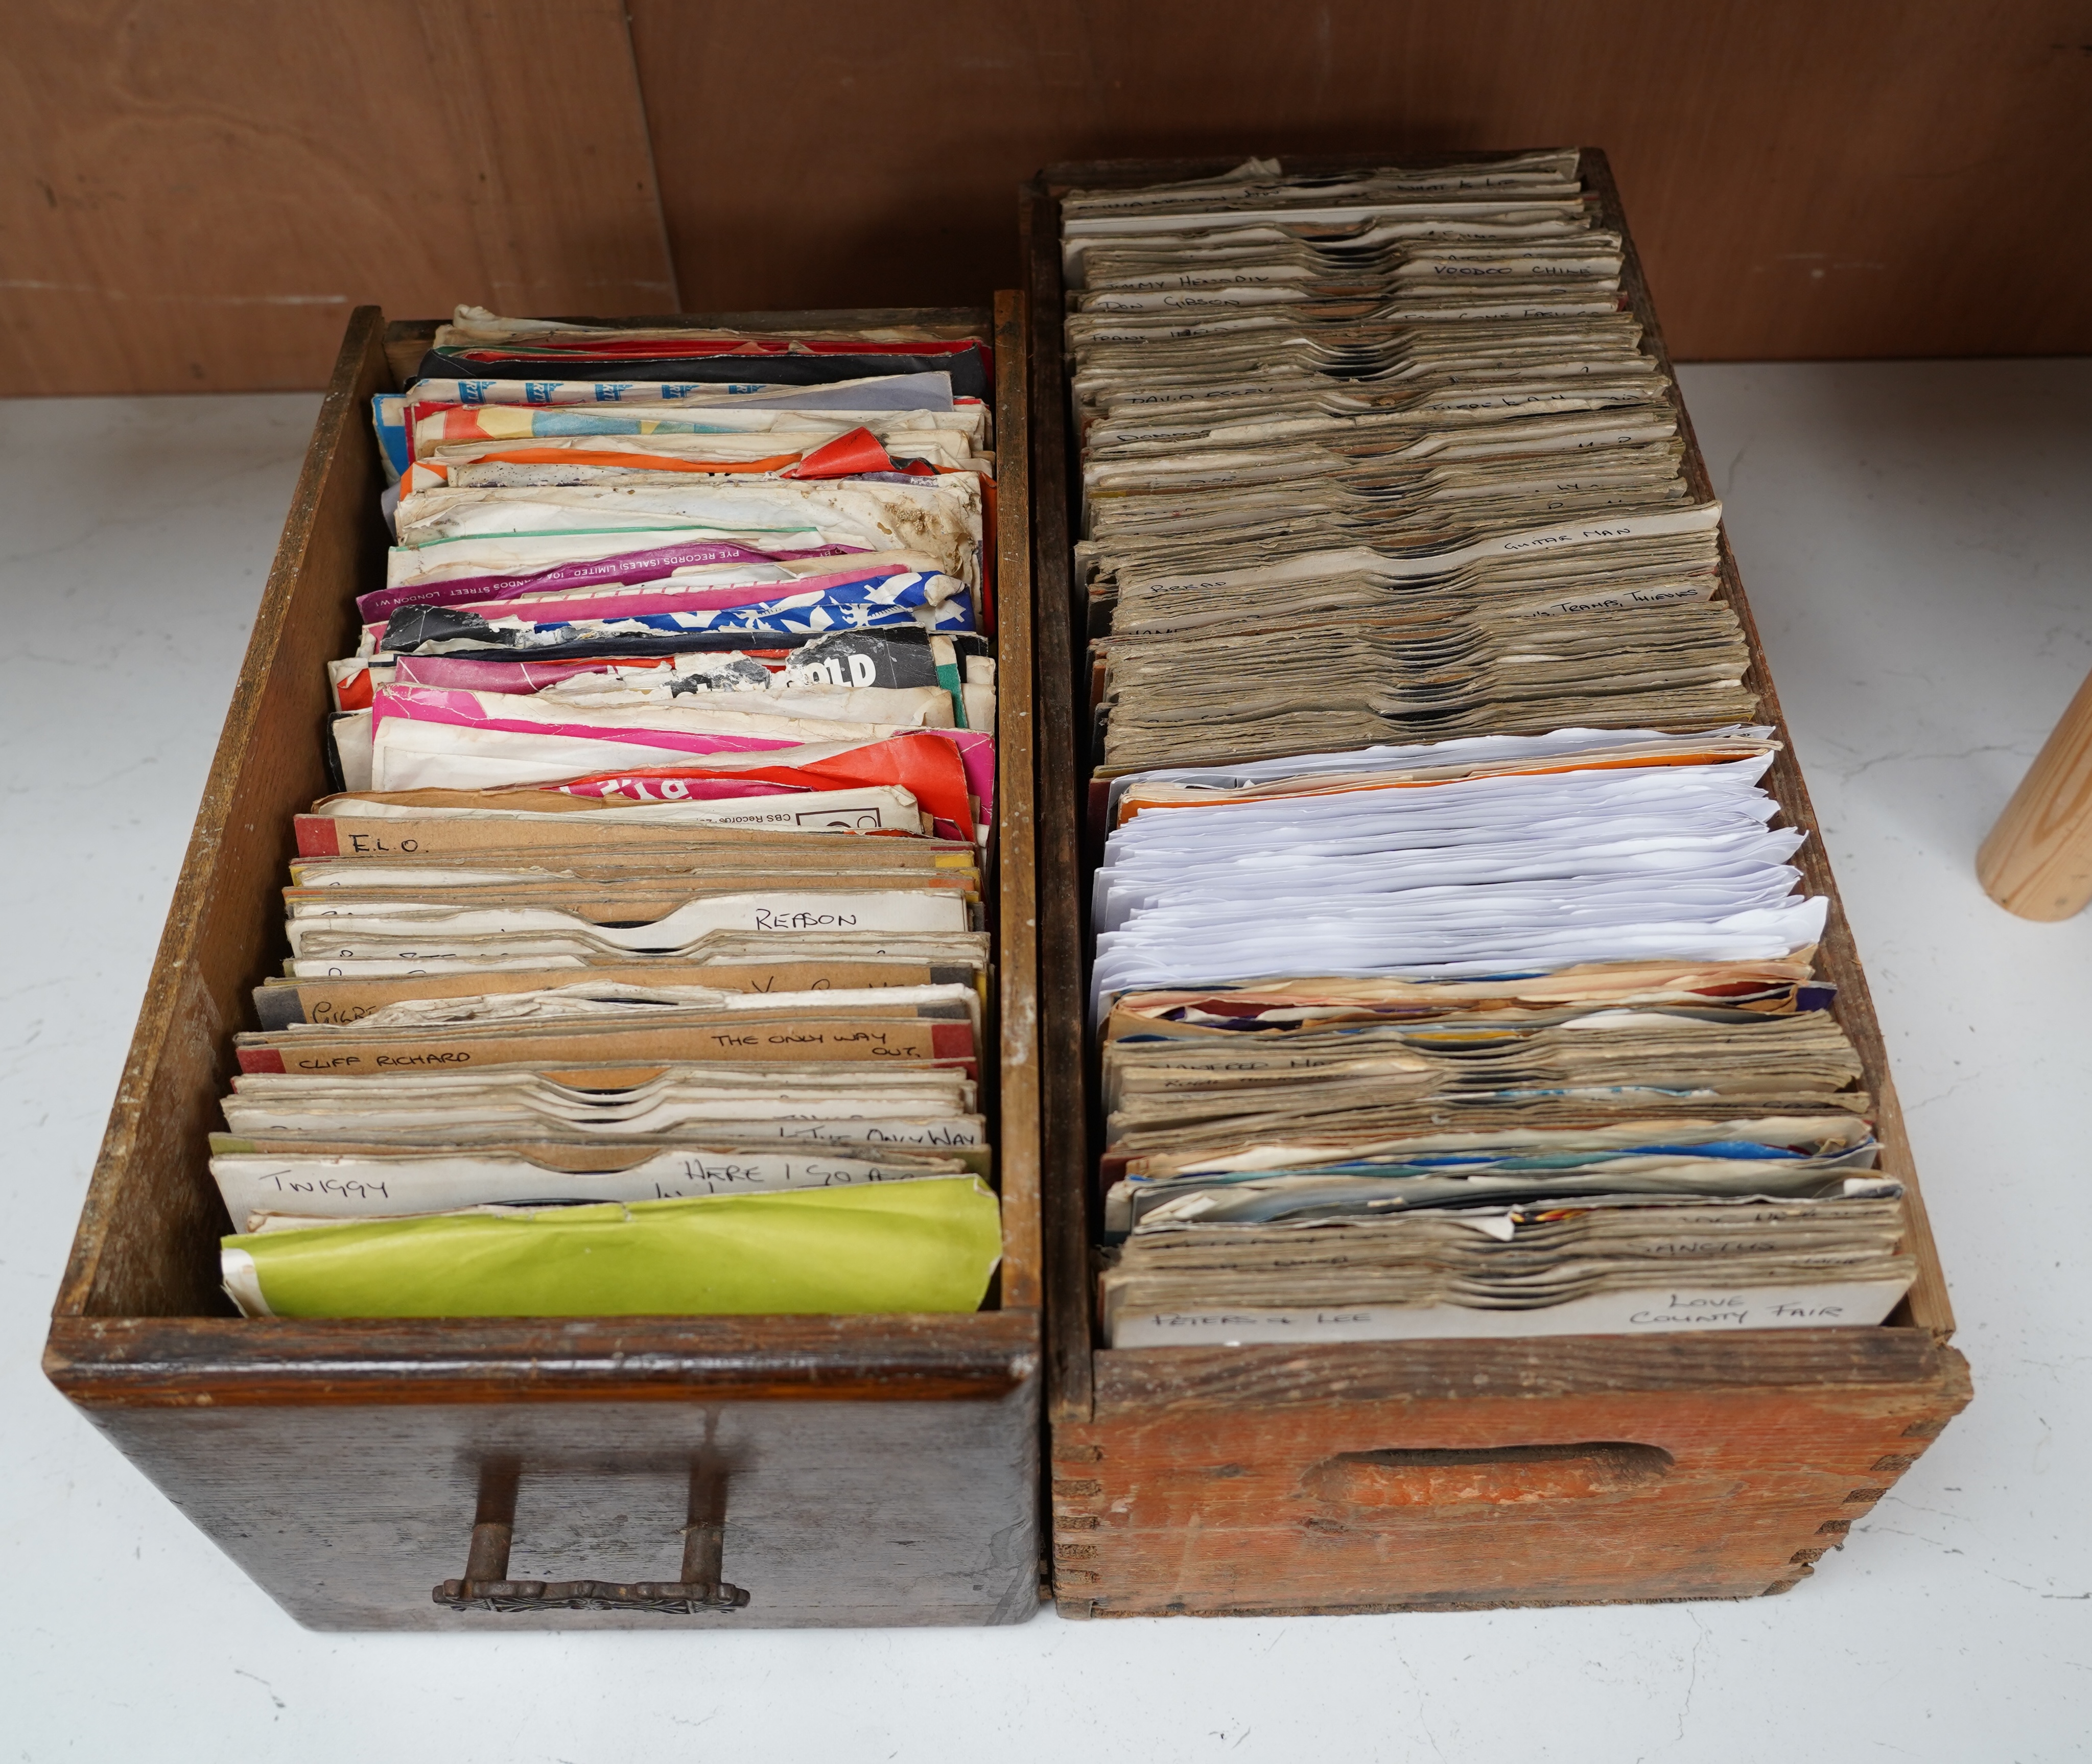 Two boxes of 7 inch singles, mainly 1960s and 1970s, including Adam and the Ants, Manfred Mann, the Stylistics, 10cc, Hot Chocolate, Bread, David Essex, Cliff Richard, ELO, the Bachelors, etc.